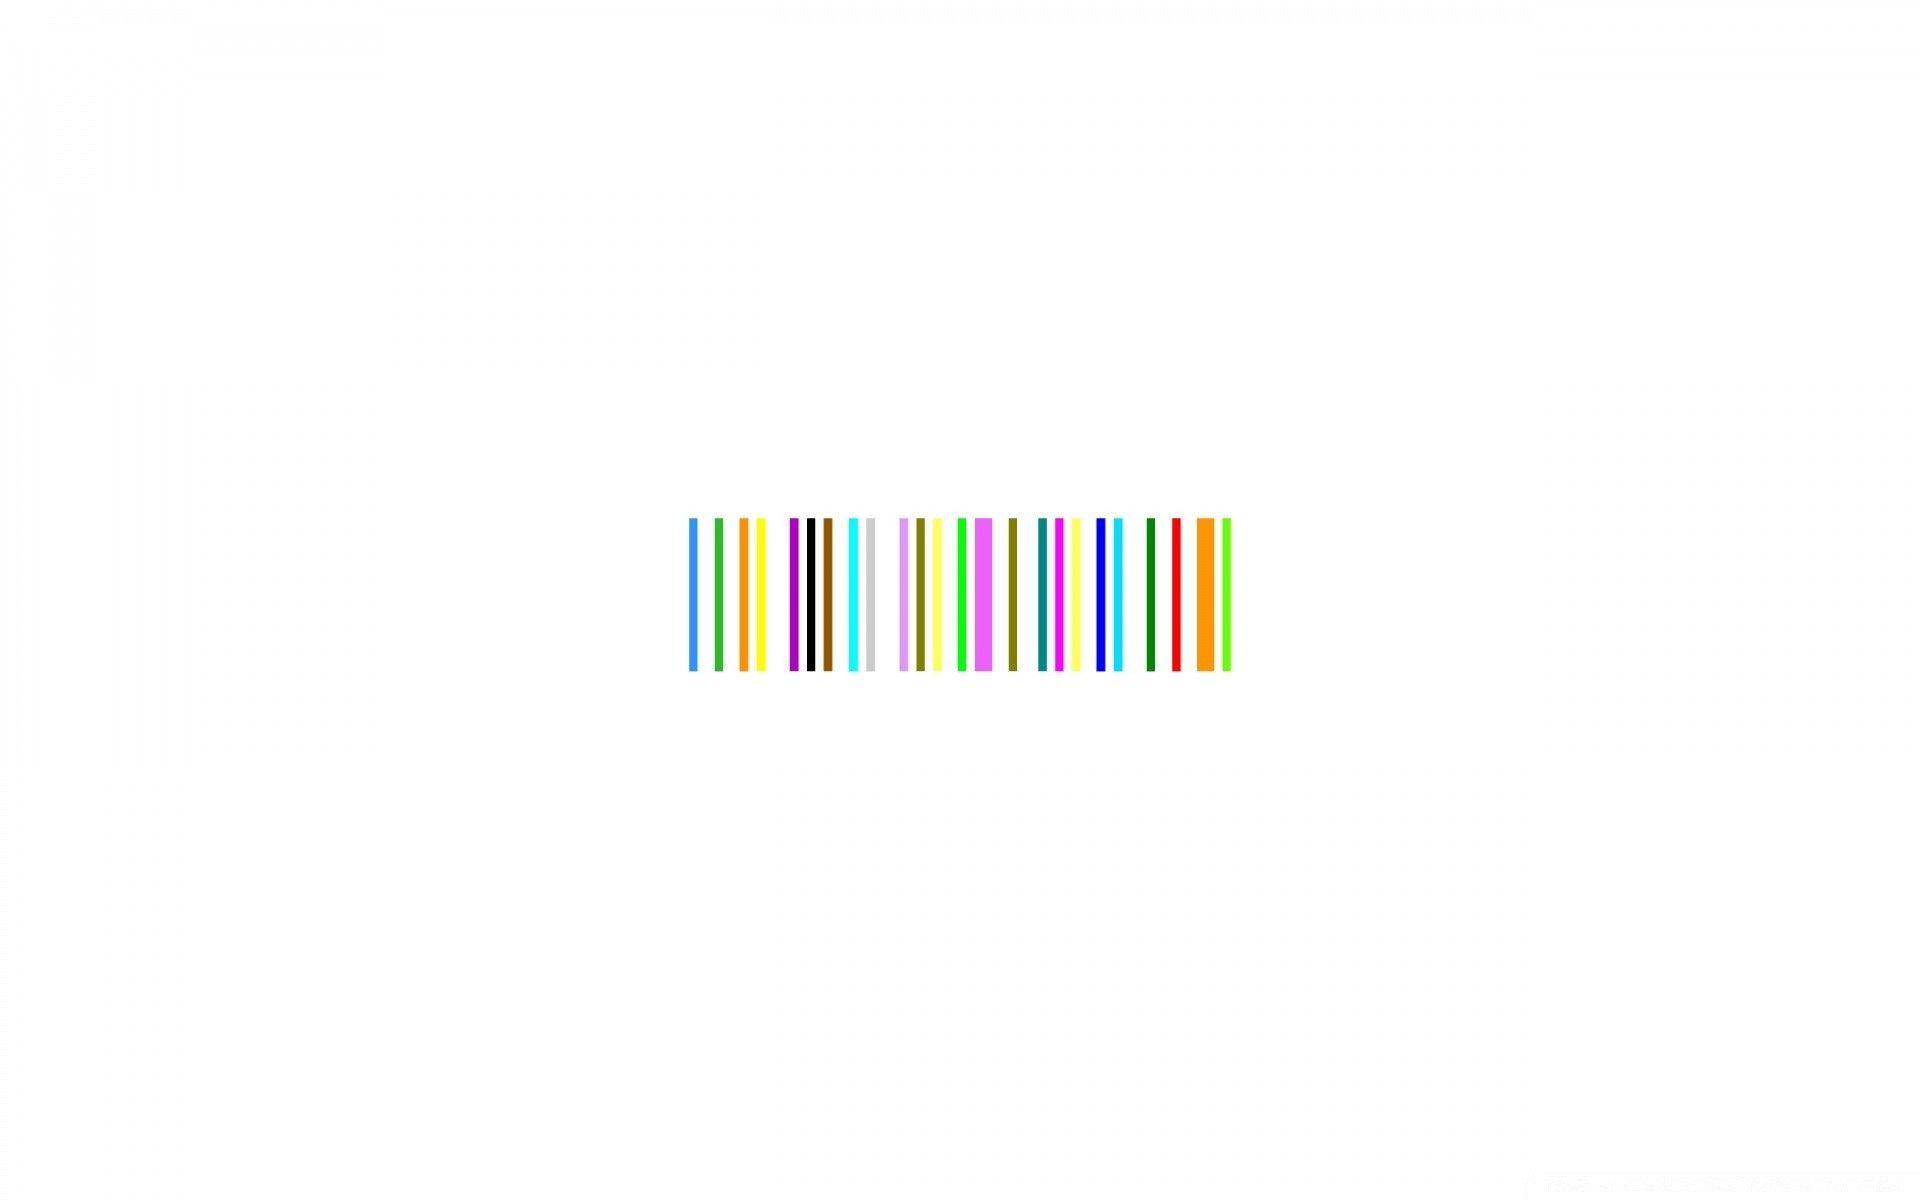 Barcode. Android wallpaper for free